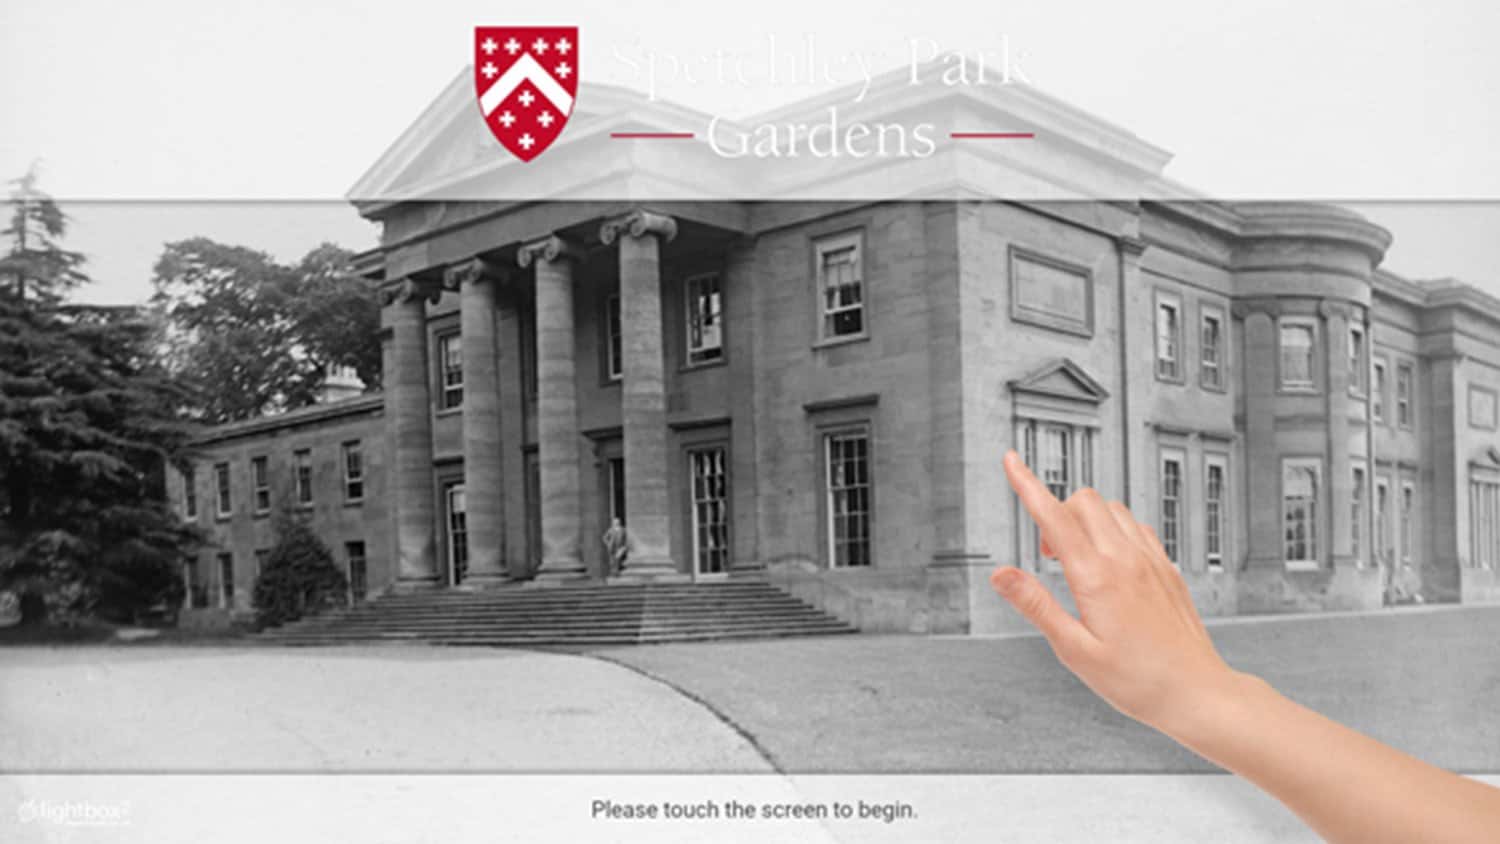 Lightbox 2 Software for Spetchley Park and Gardens